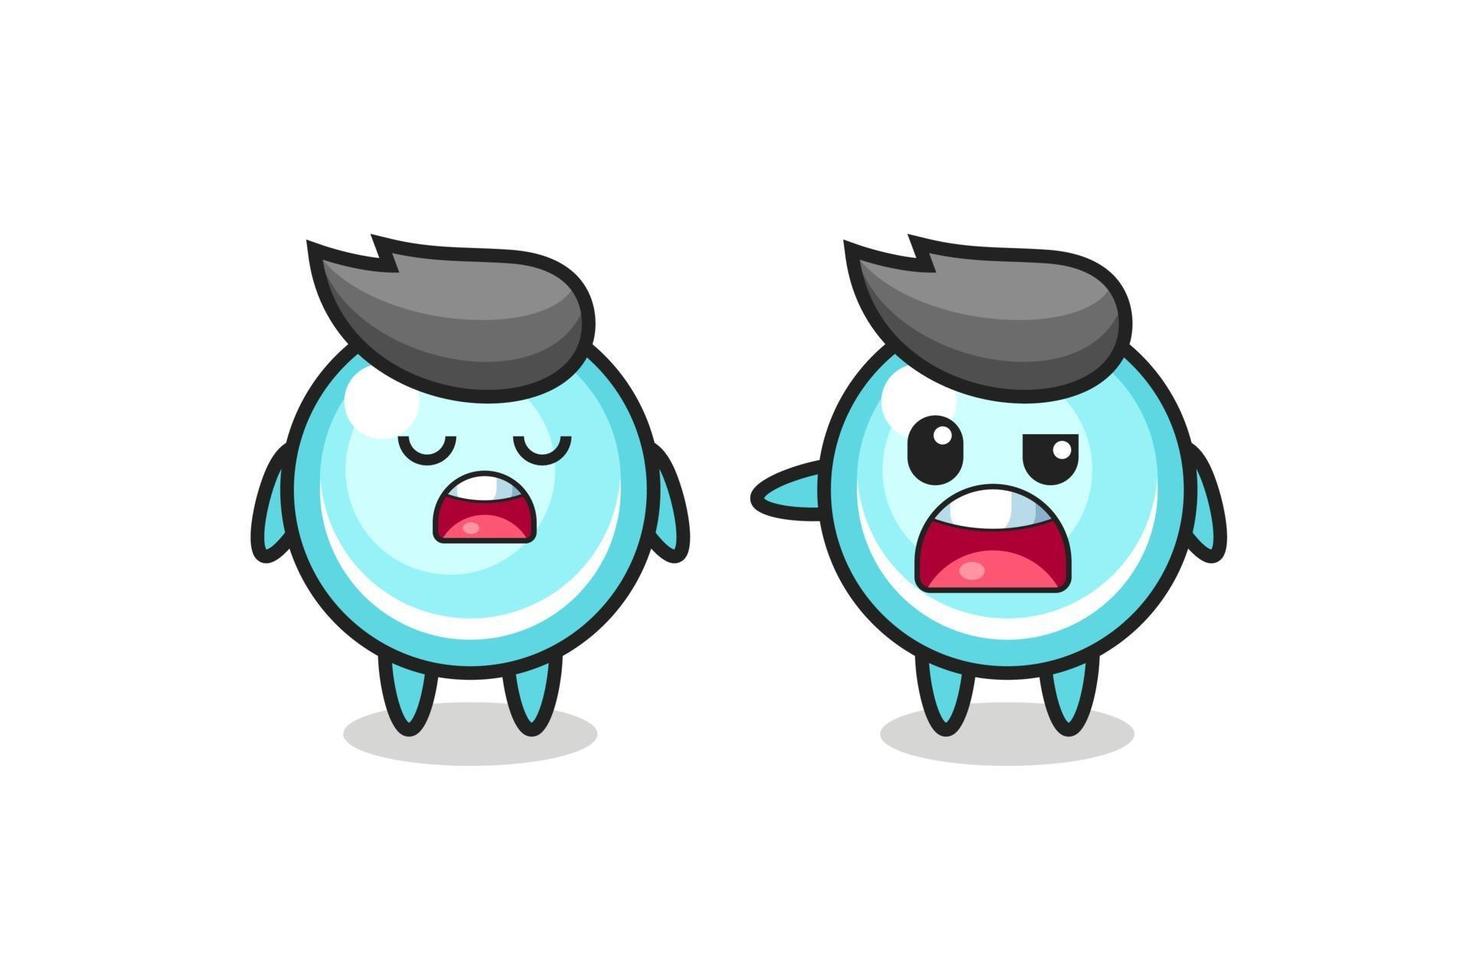 illustration of the argue between two cute bubble characters vector